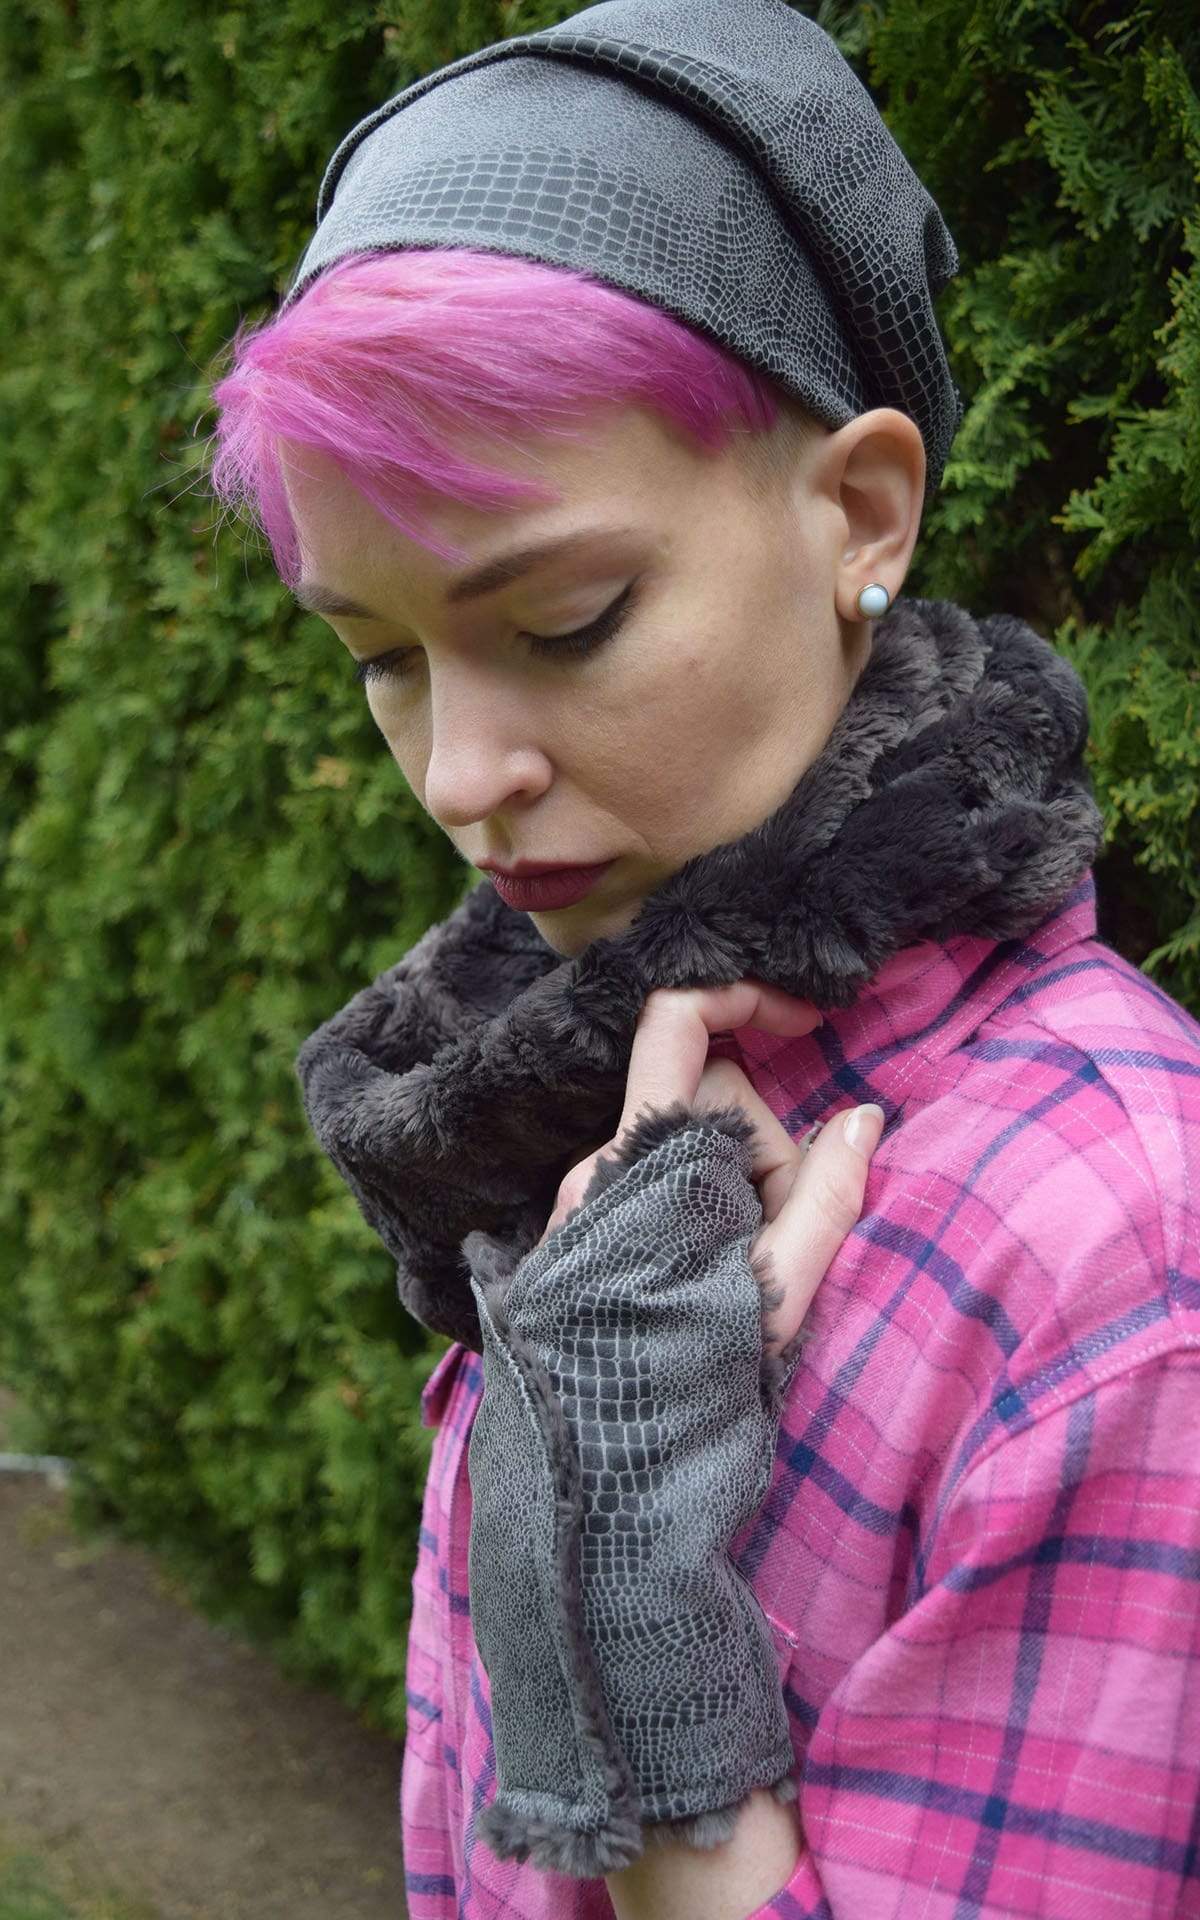 Model wearing a Neck Warmer in Espresso Bean Faux Fur | Also Shown a Vegan Leather Beret in Outback Brown | Handmade in the USA by Pandemonium Seattle